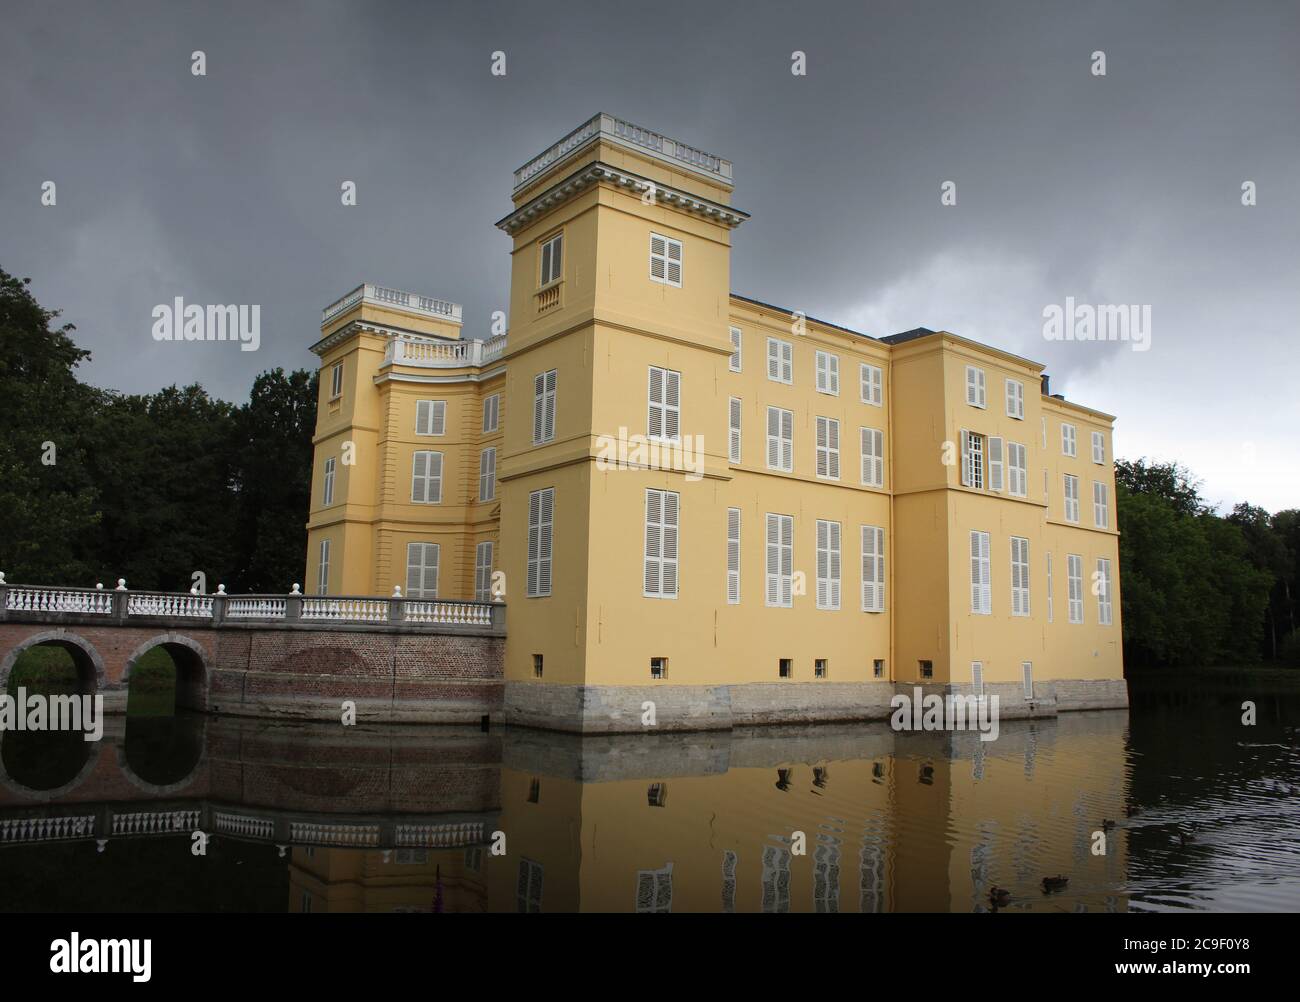 HINGENE, BELGIUM, 16 JULY 2020: The beautiful water surrounded d'Ursel Castle in Hingene. The castle provides the backdrop for the biennial 'Castle Fe Stock Photo